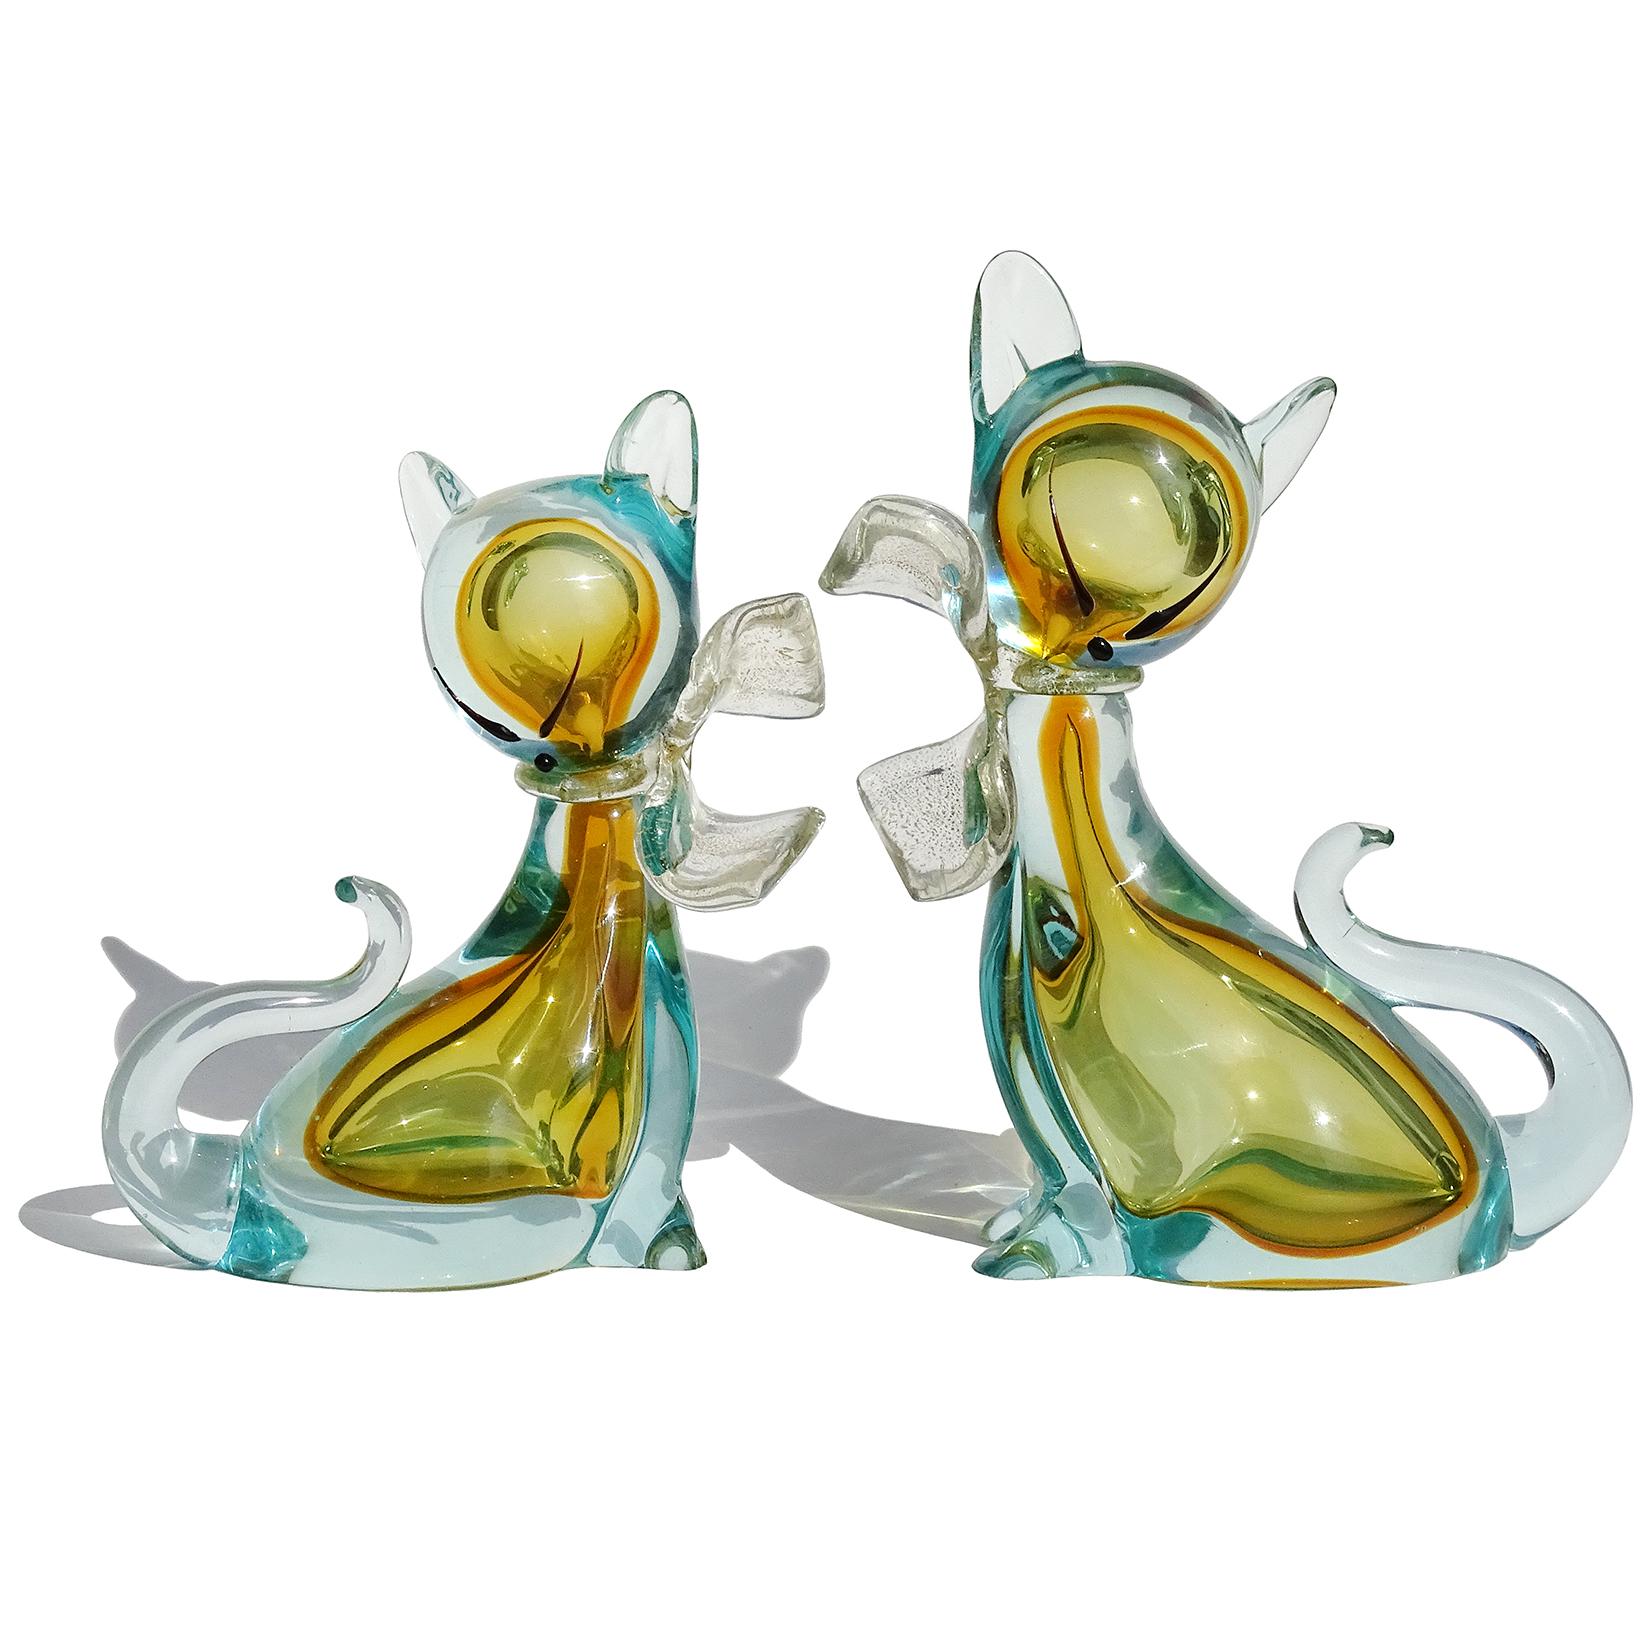 Beautiful vintage Murano hand blown Sommerso golden yellow core and gold flecks art glass kitty cat figurines. Documented to designer Alfredo Barbini. Published in his catalog. The matching pair have gold leaf bows around their necks. Very elegant